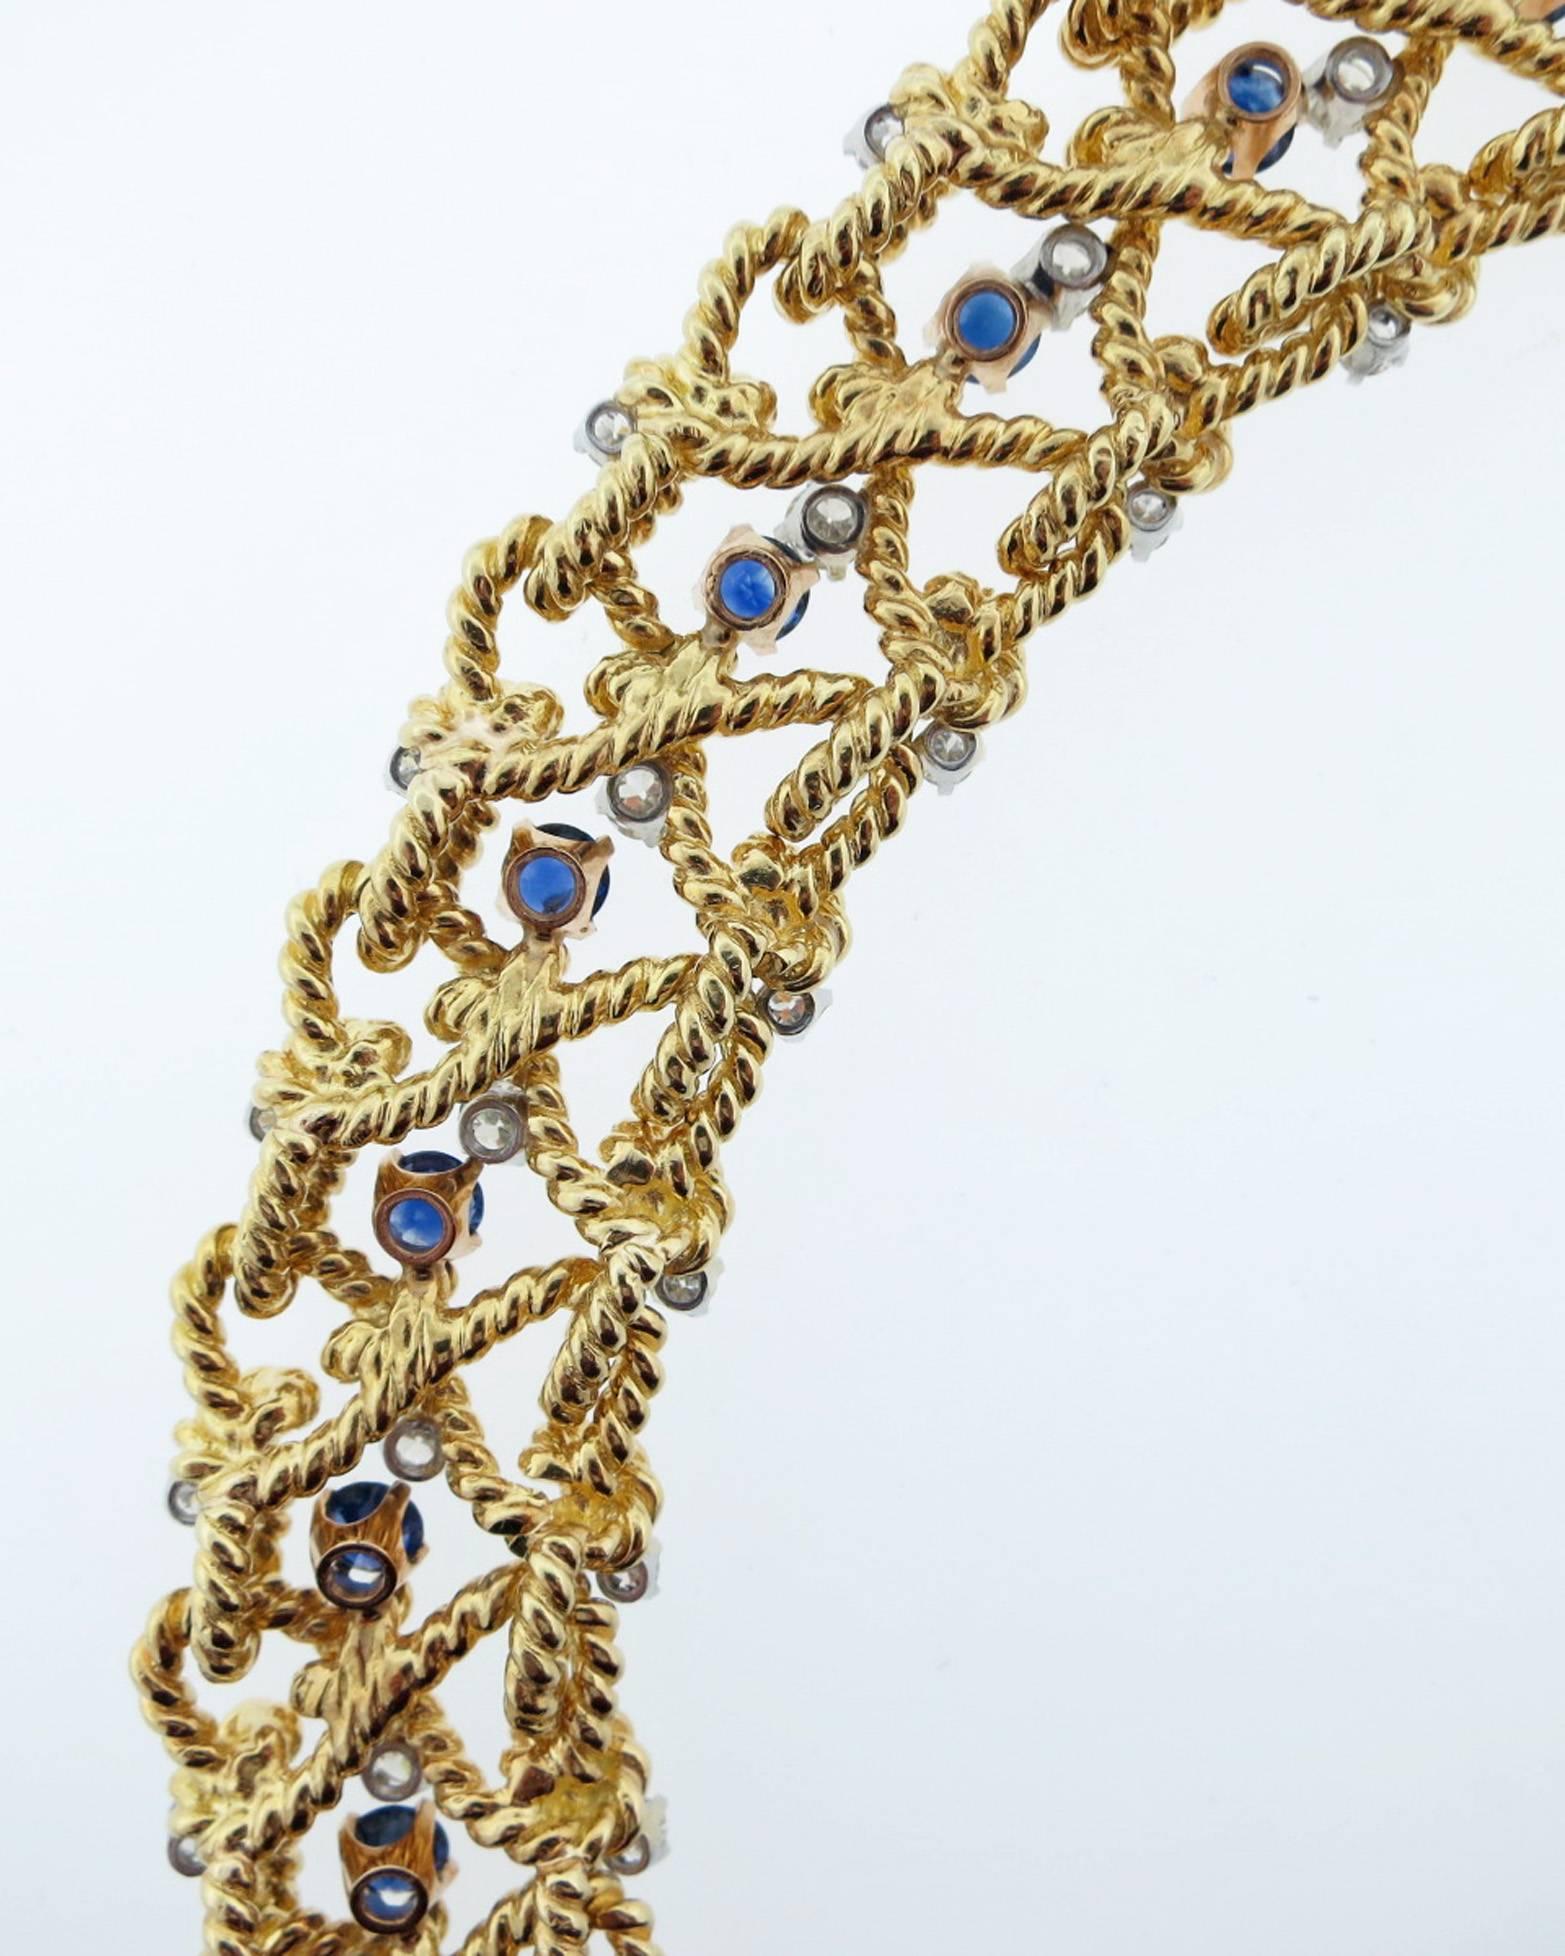 Ladies 18kt. rope designed yellow gold link bracelet measuring 7 1/2 inches in length and over 3/4 inch in width. Set with 36 round brilliant cut diamonds in white gold mounts totaling approx 4.2 cts. and 12 prong set round faceted vibrant blue